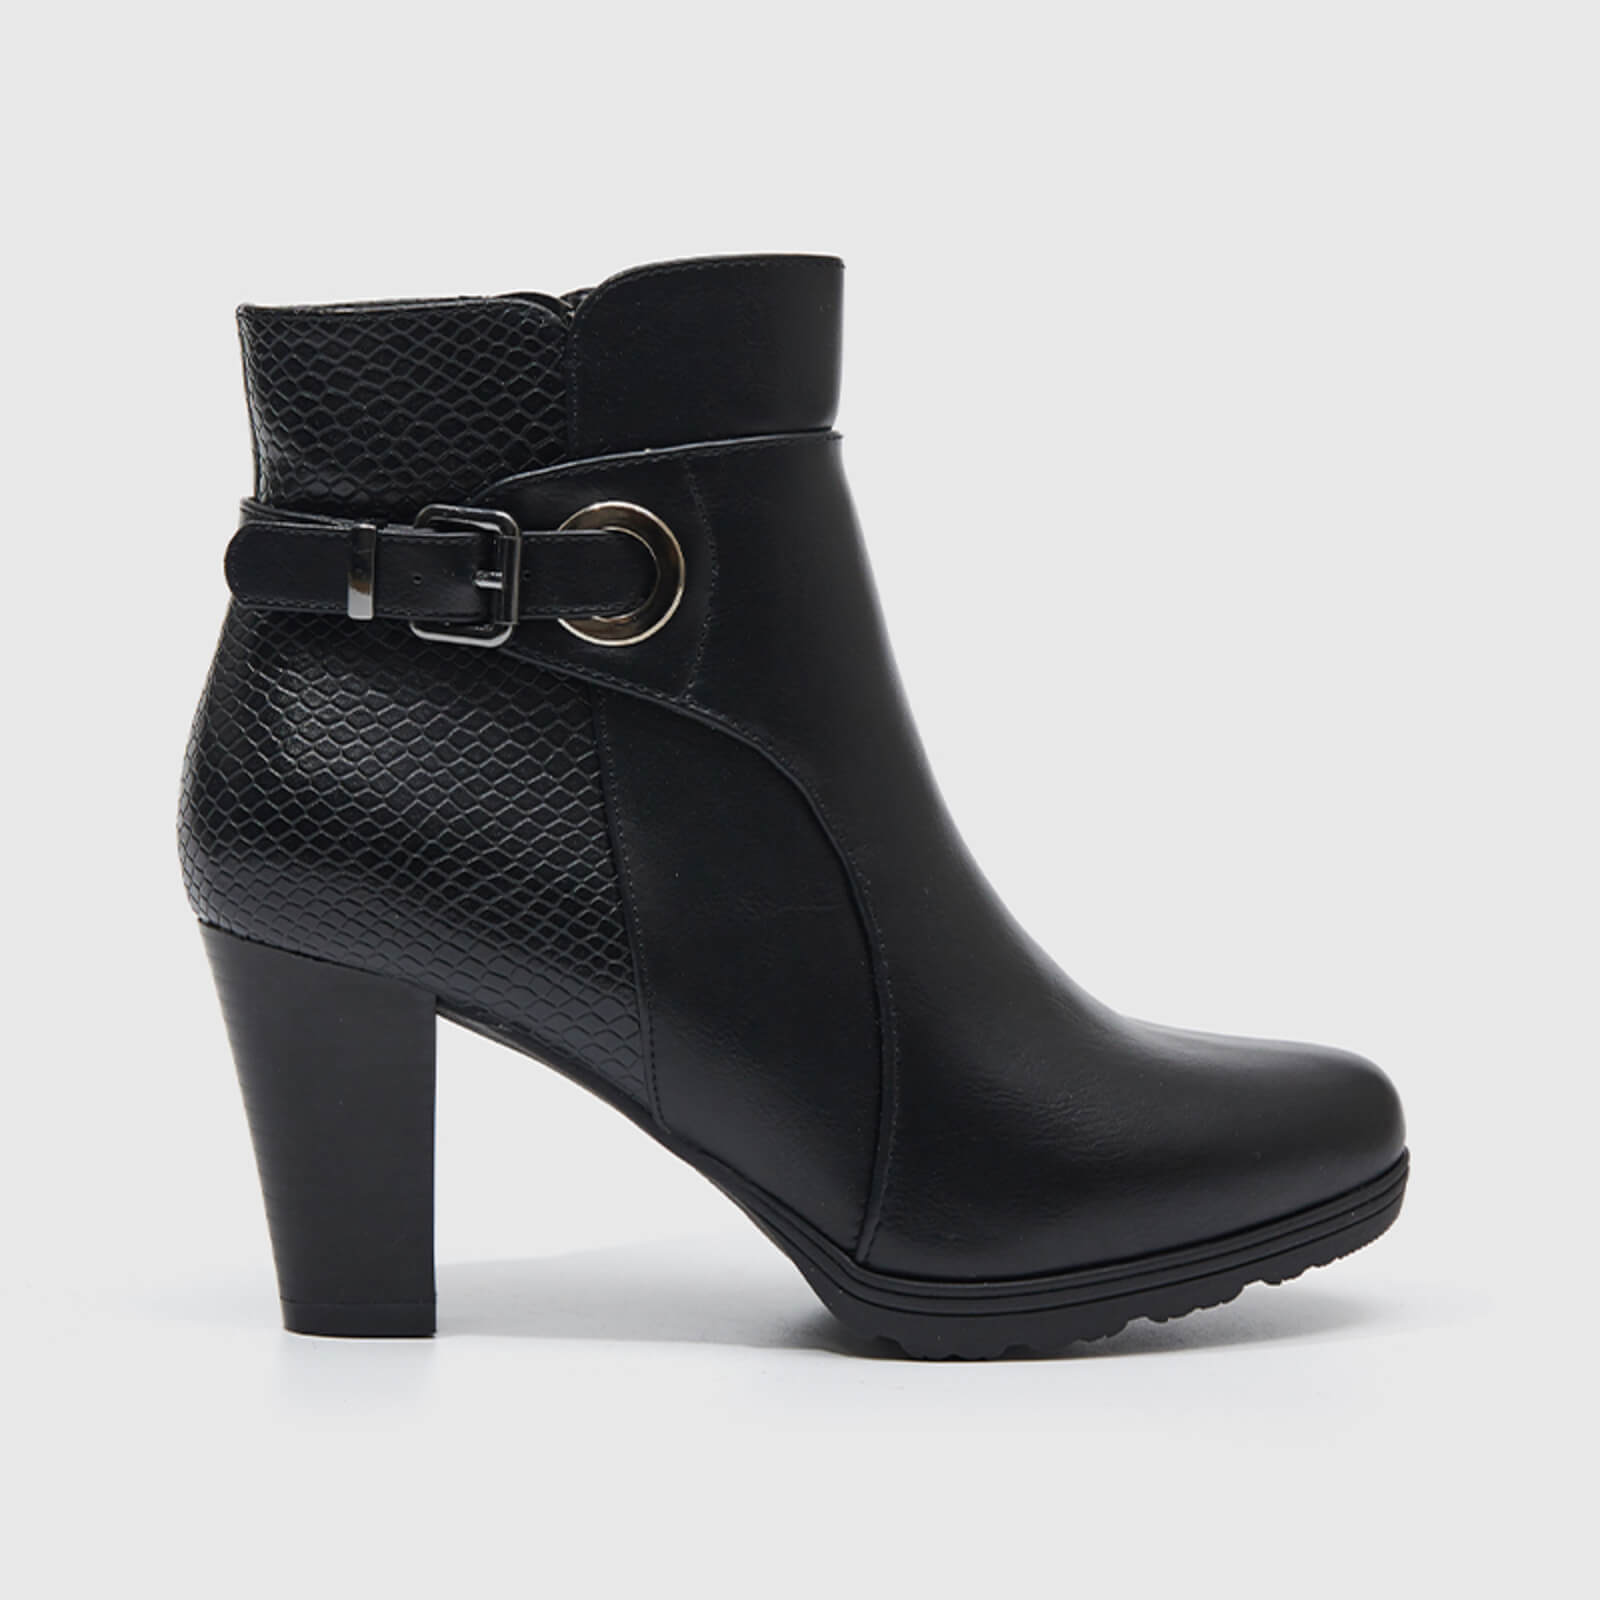 Buckle Strap Ankle Boots